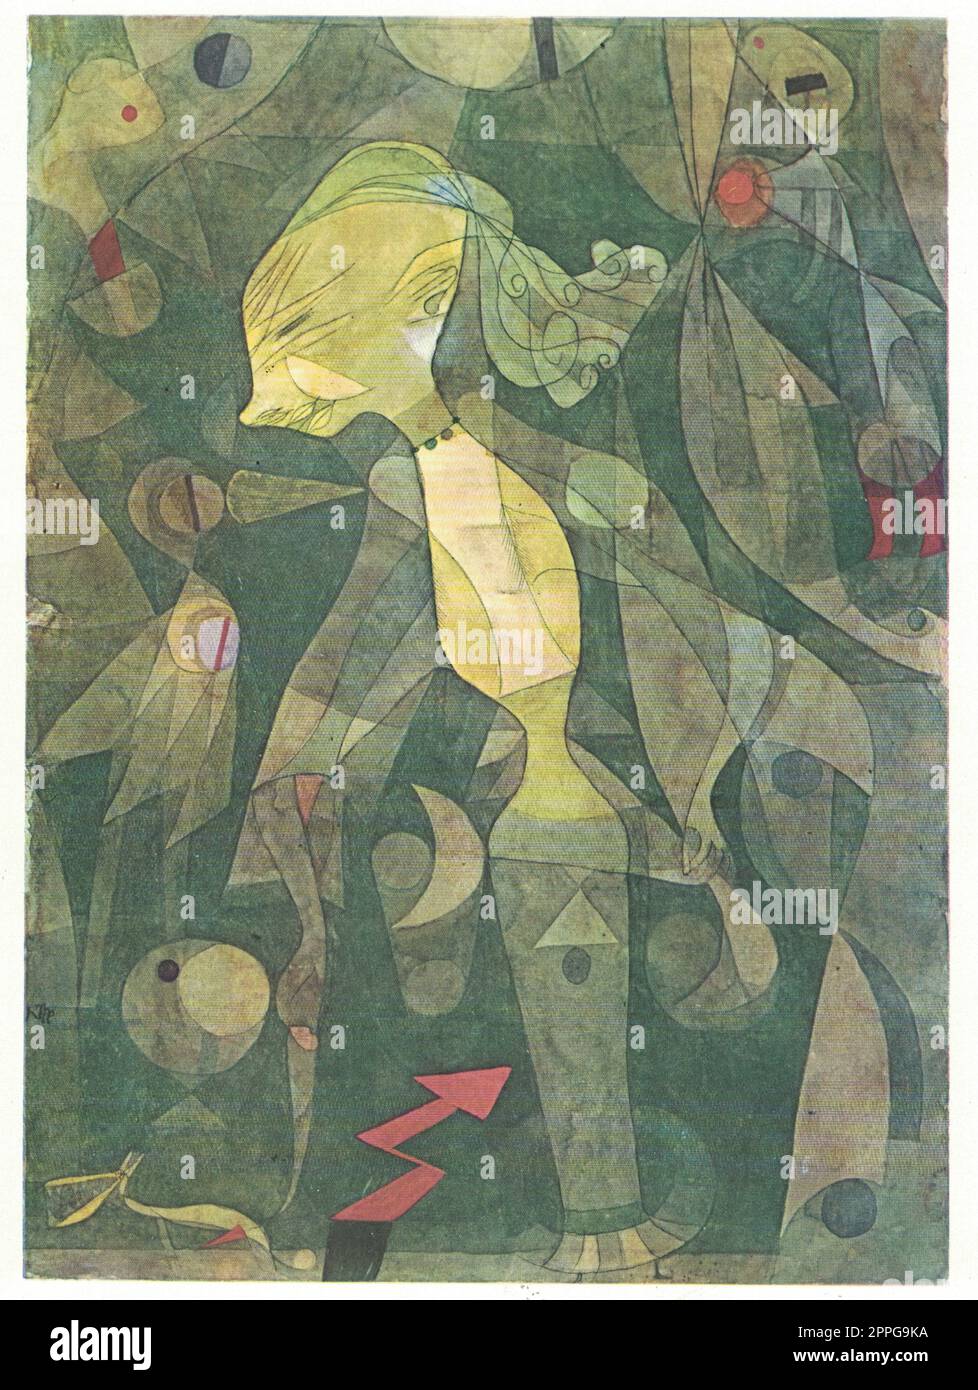 A Young Lady's Adventure, 1922, watercolor on paper. Painting by Paul Klee. Stock Photo